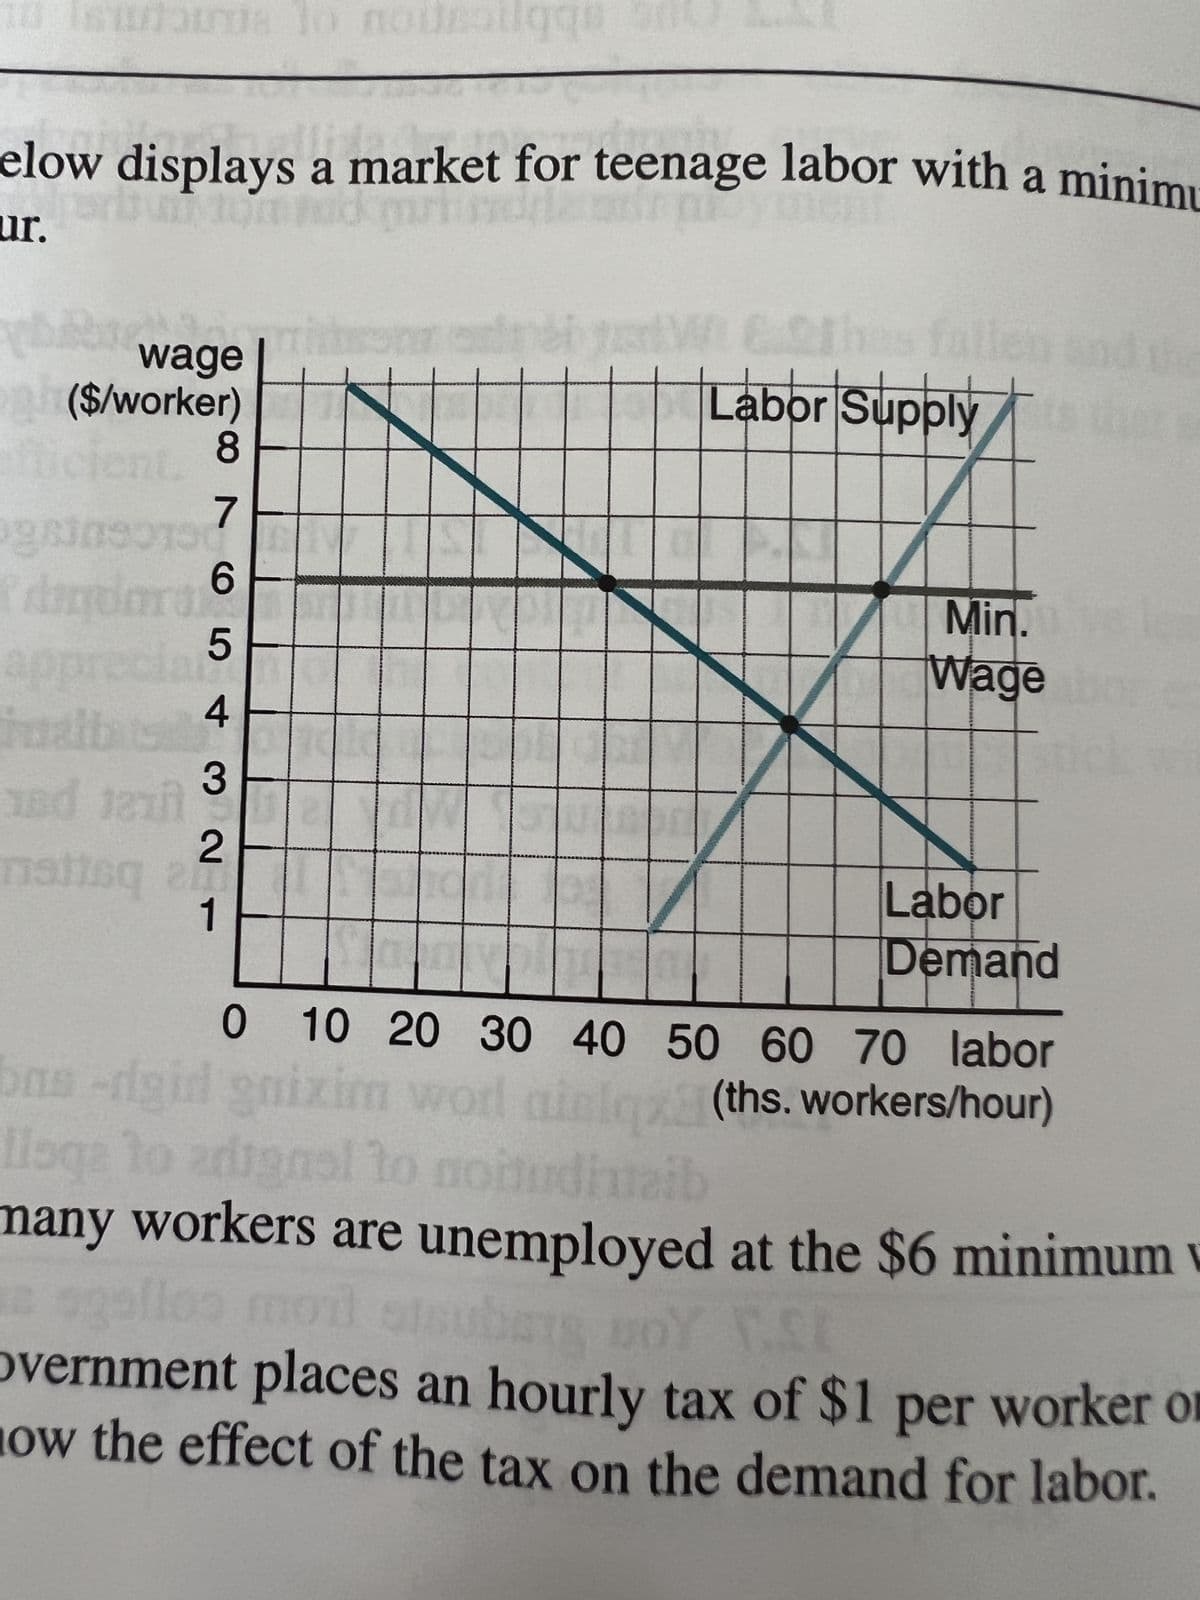 u istuia lo nousailggs
elow displays a market for teenage labor with a minimu
ani mayment,
ur.
wage
($/worker)
8
lent.
gainsoo
daryo
765432
1
jual
180 1211
malisq an
1
+
Labor Supply
Min.
Wage
Labor
Demand
0 10 20 30 40 50 60 70 labor
bas
ons -digid gnizim or ainlqx (ths. workers/hour)
llage to adignal to noitudinaib
many workers are unemployed at the $6 minimum v
se egallos moil stsubang BDY T.St
overnment places an hourly tax of $1 per worker or
ow the effect of the tax on the demand for labor.